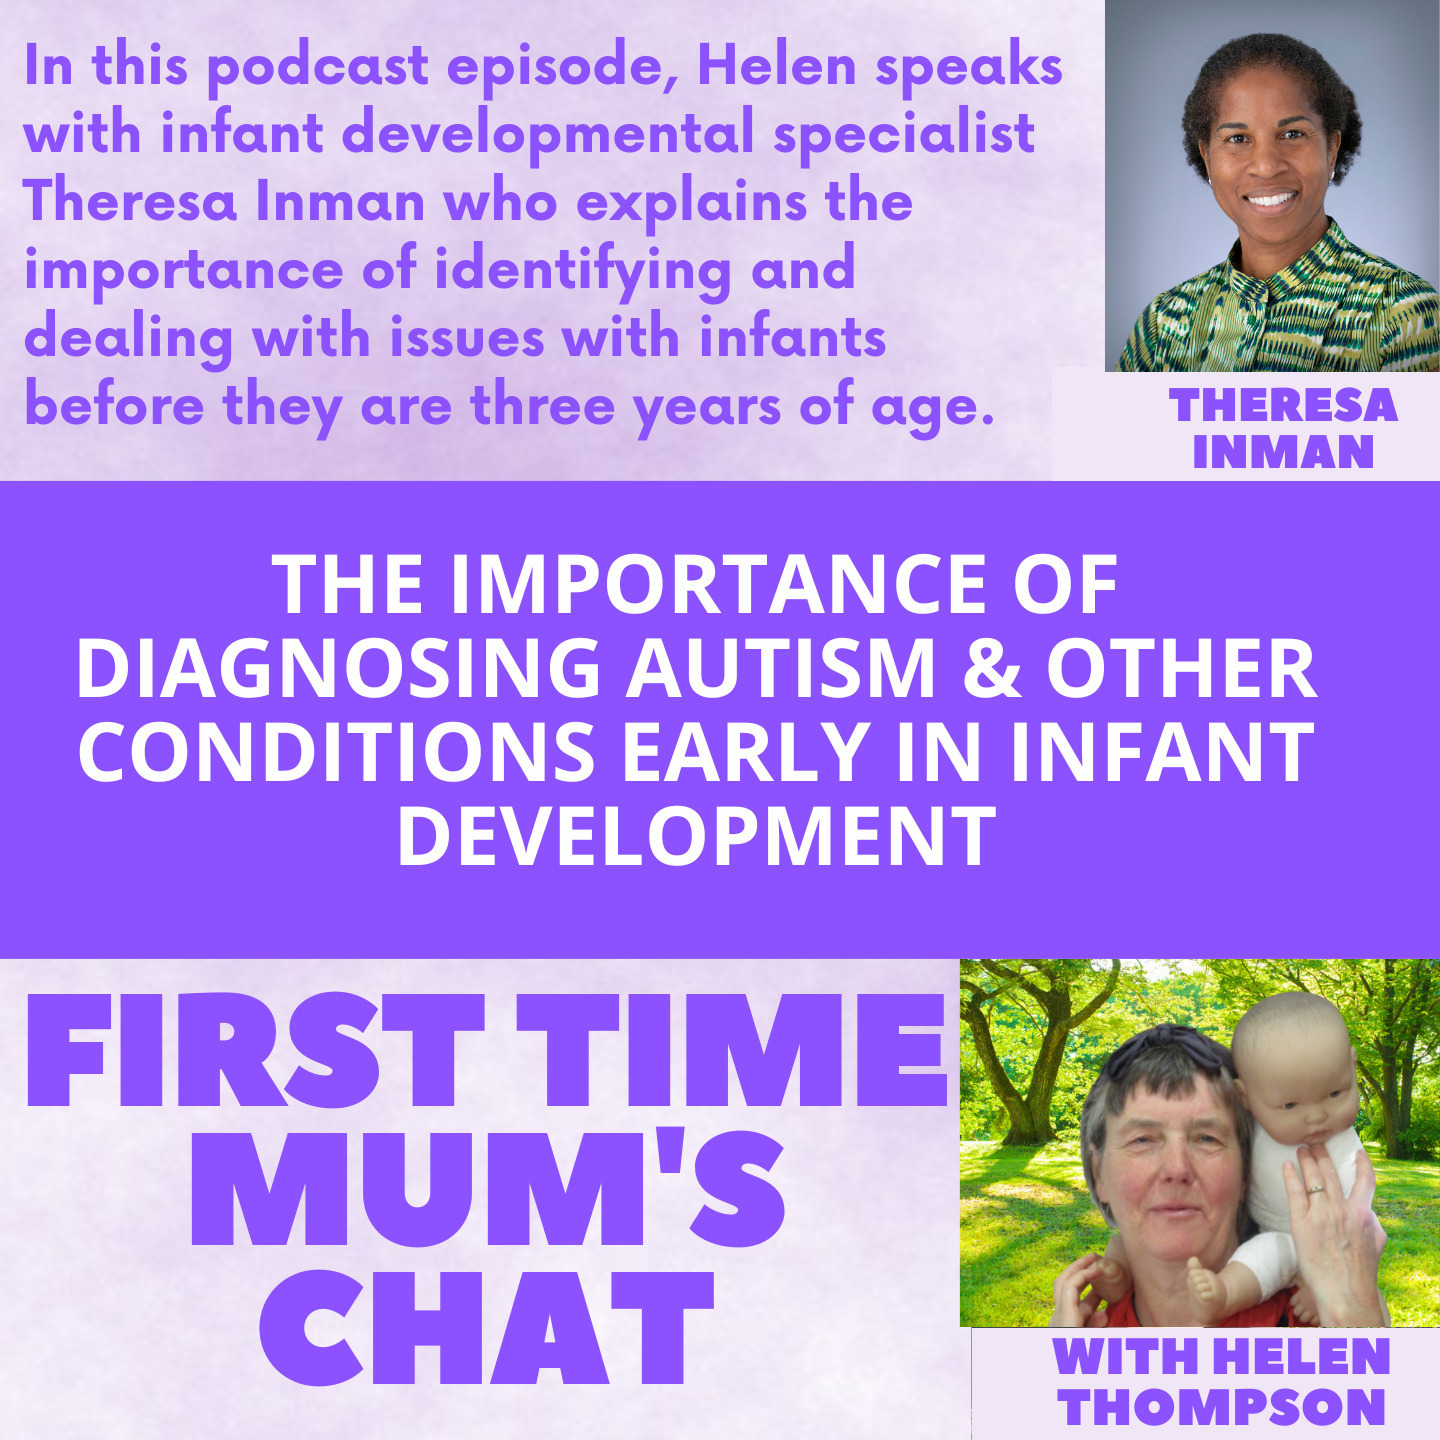 The Importance of Diagnosing Autism & Other Conditions Early in Infant Development